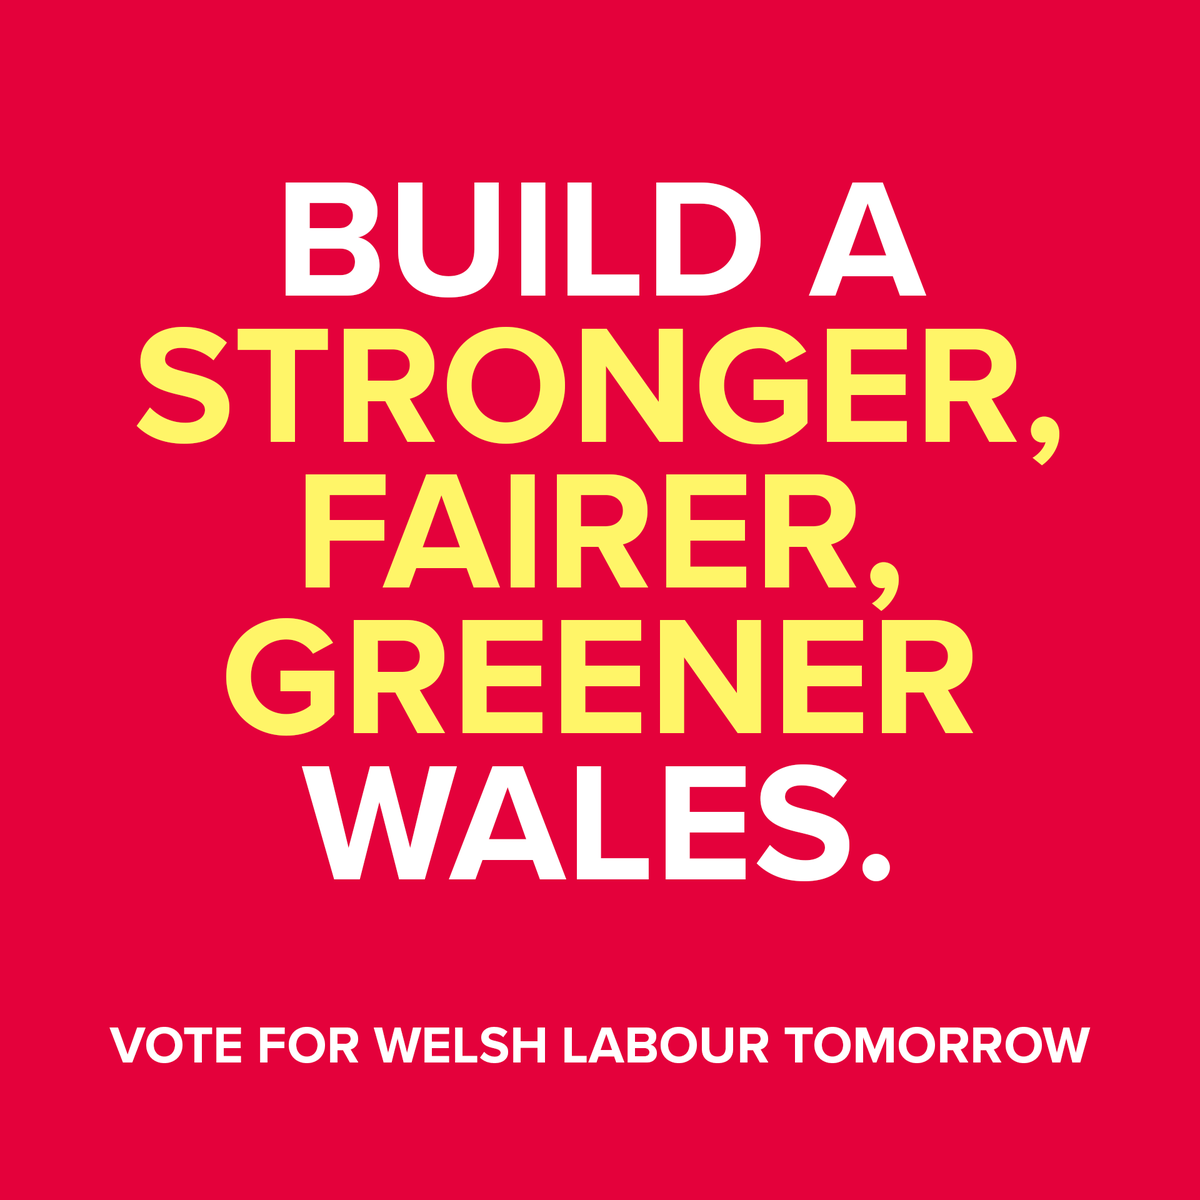 💪 Stronger ♥️ Fairer ♻️ Greener 🏴󠁧󠁢󠁷󠁬󠁳󠁿 Wales 🗓️ Tomorrow Find your polling station: iwillvote.org.uk